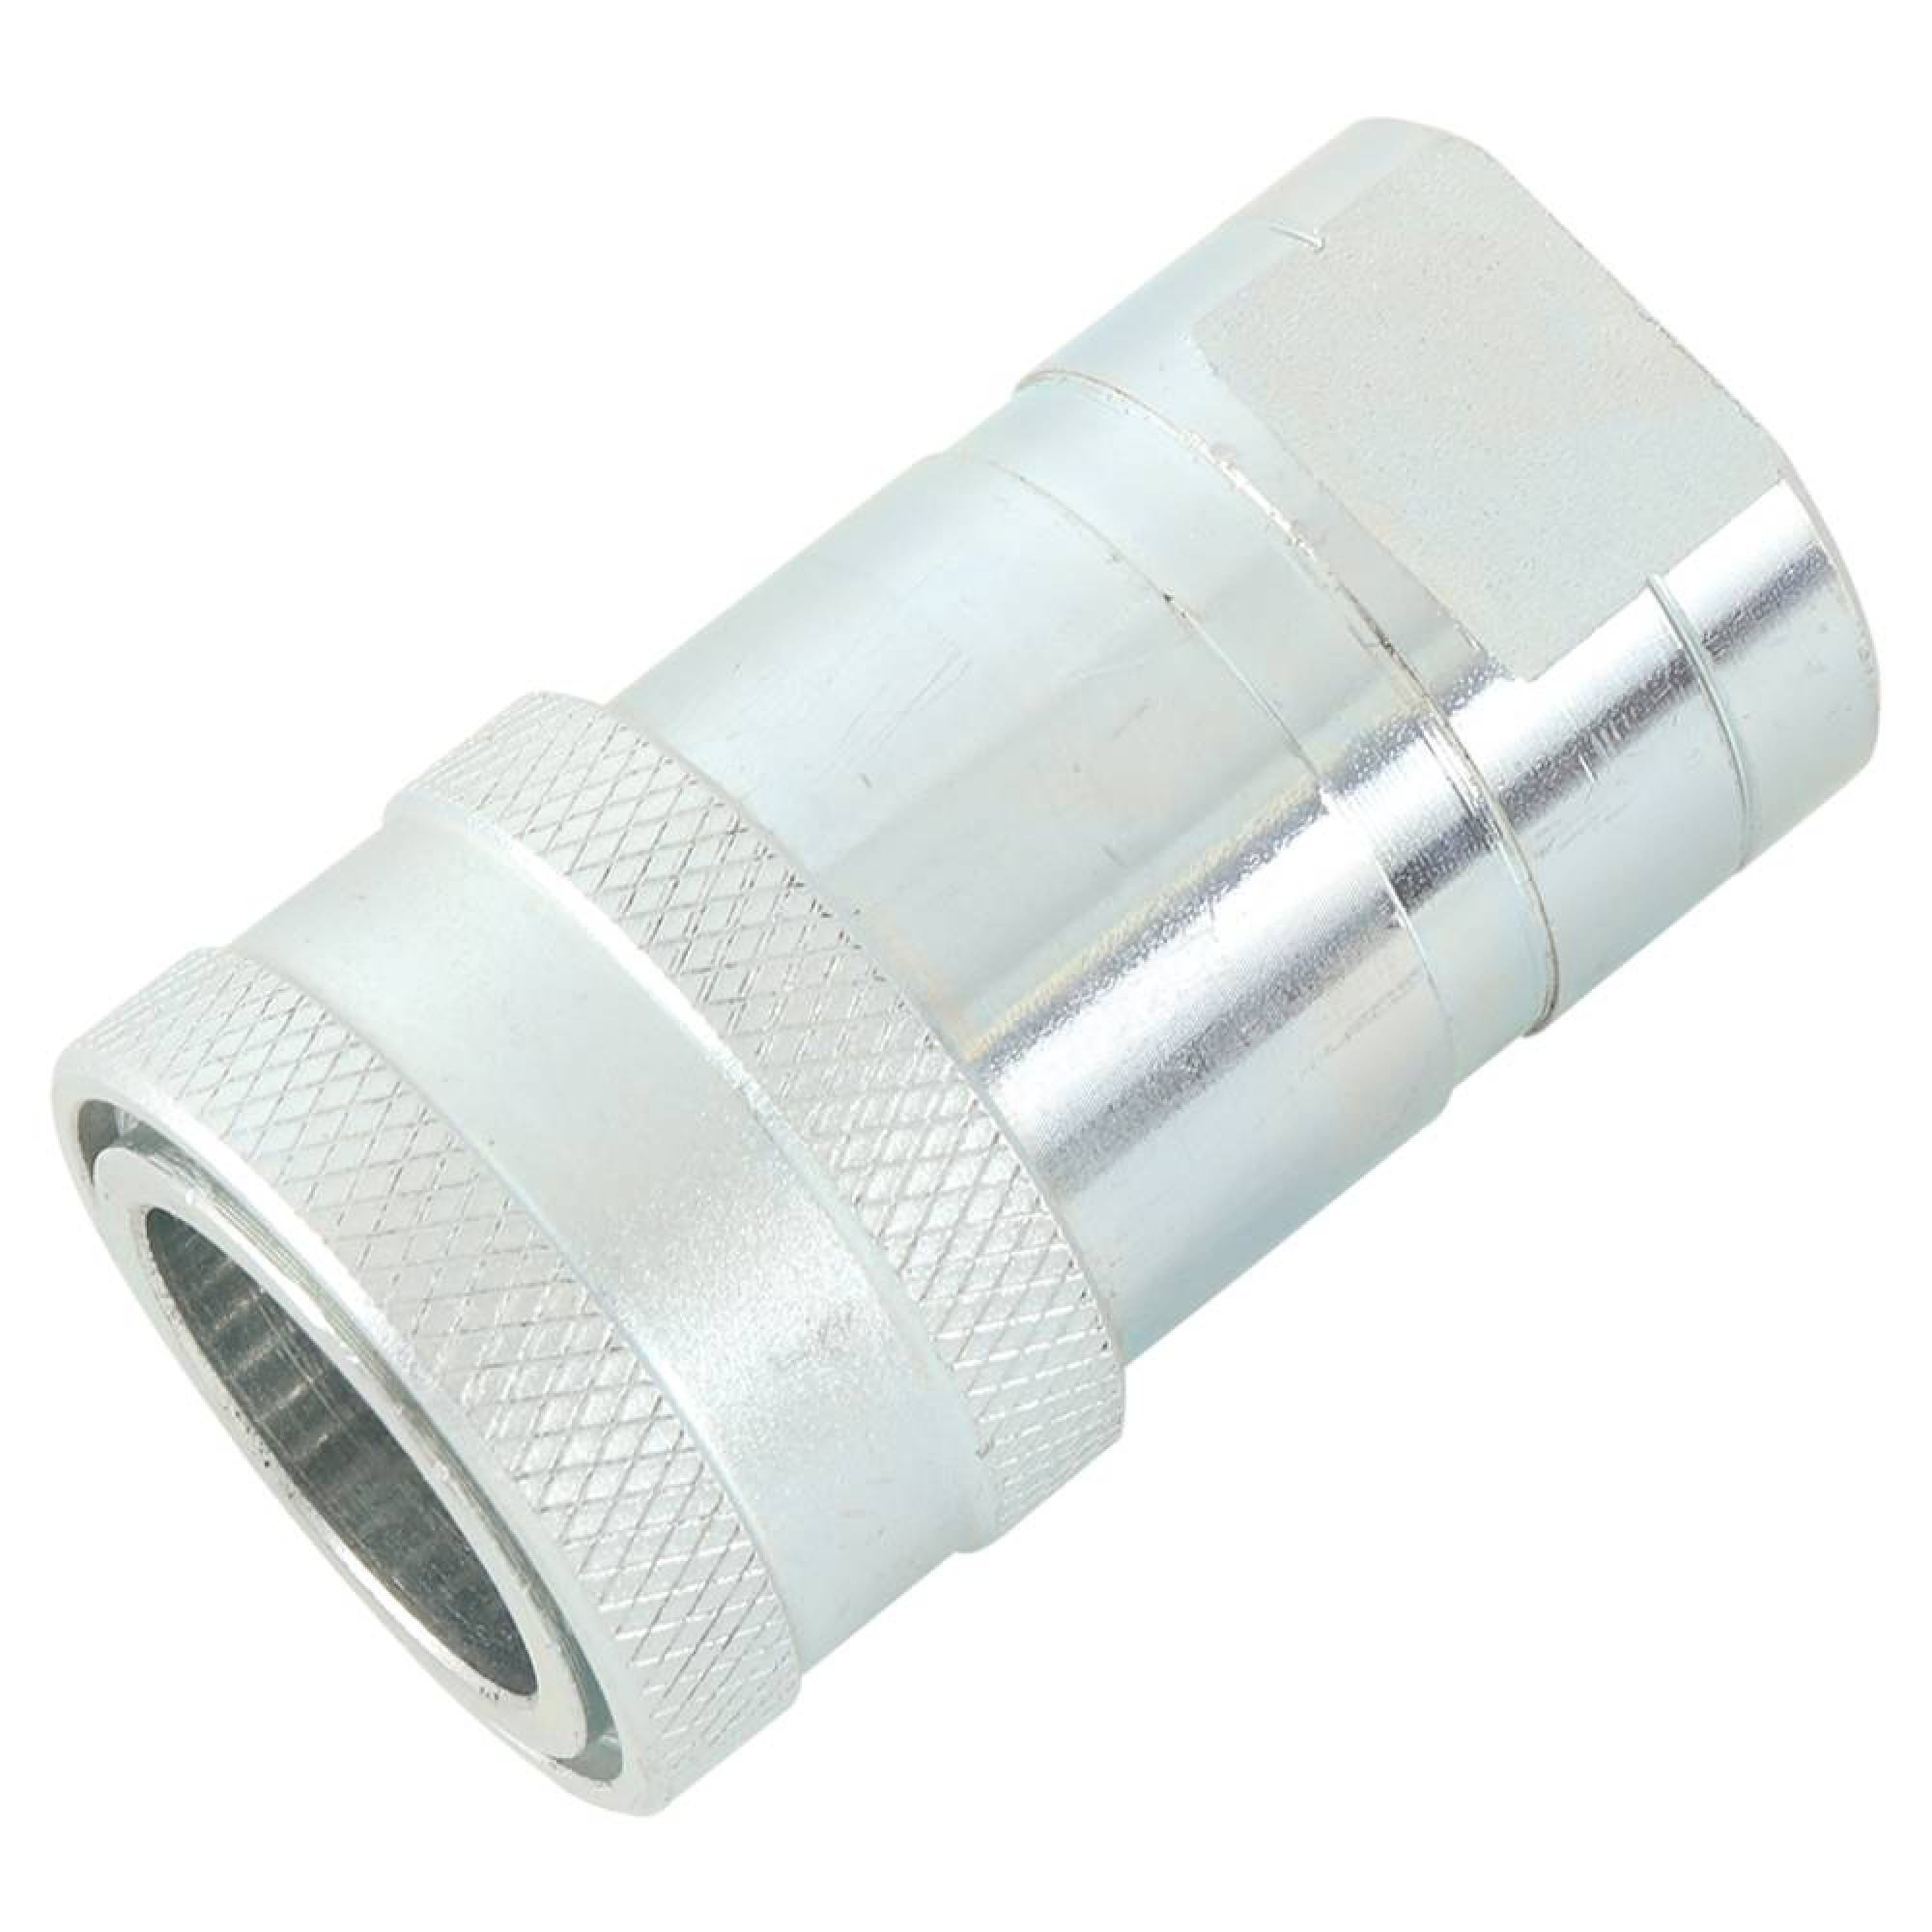 Complete Tractor Female Coupler for Universal Products 4050-3P